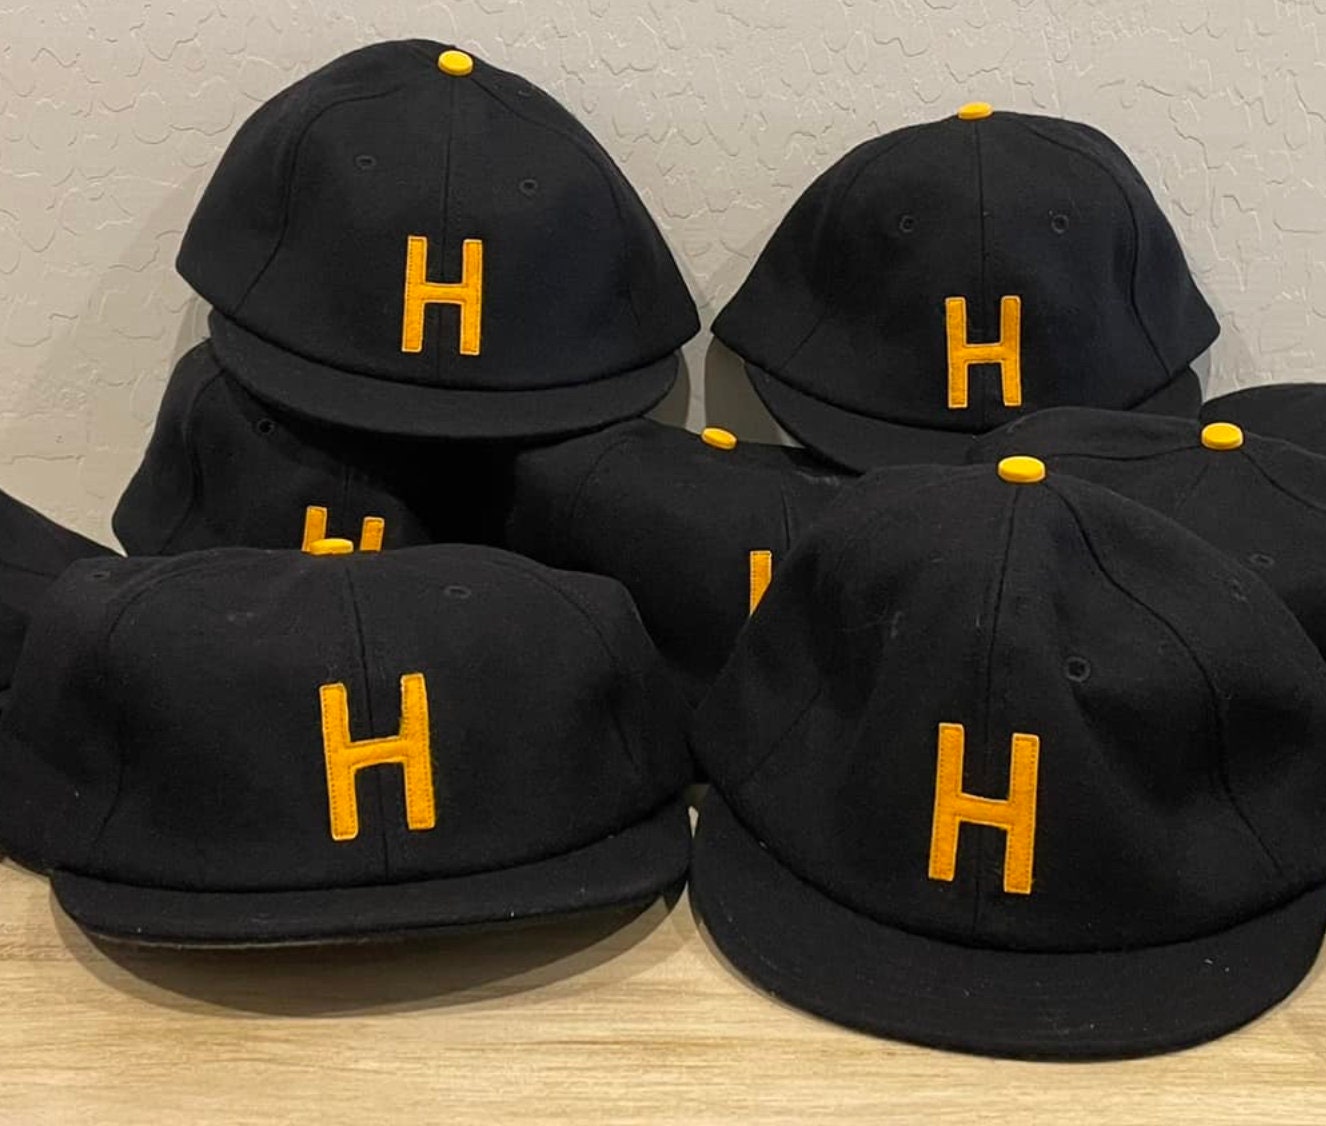 Higley Haymakers Vintage Base Ball Team Cap. Wool 6 panel cap, 2 inch  visor, wool felt H, Select size at checkout.